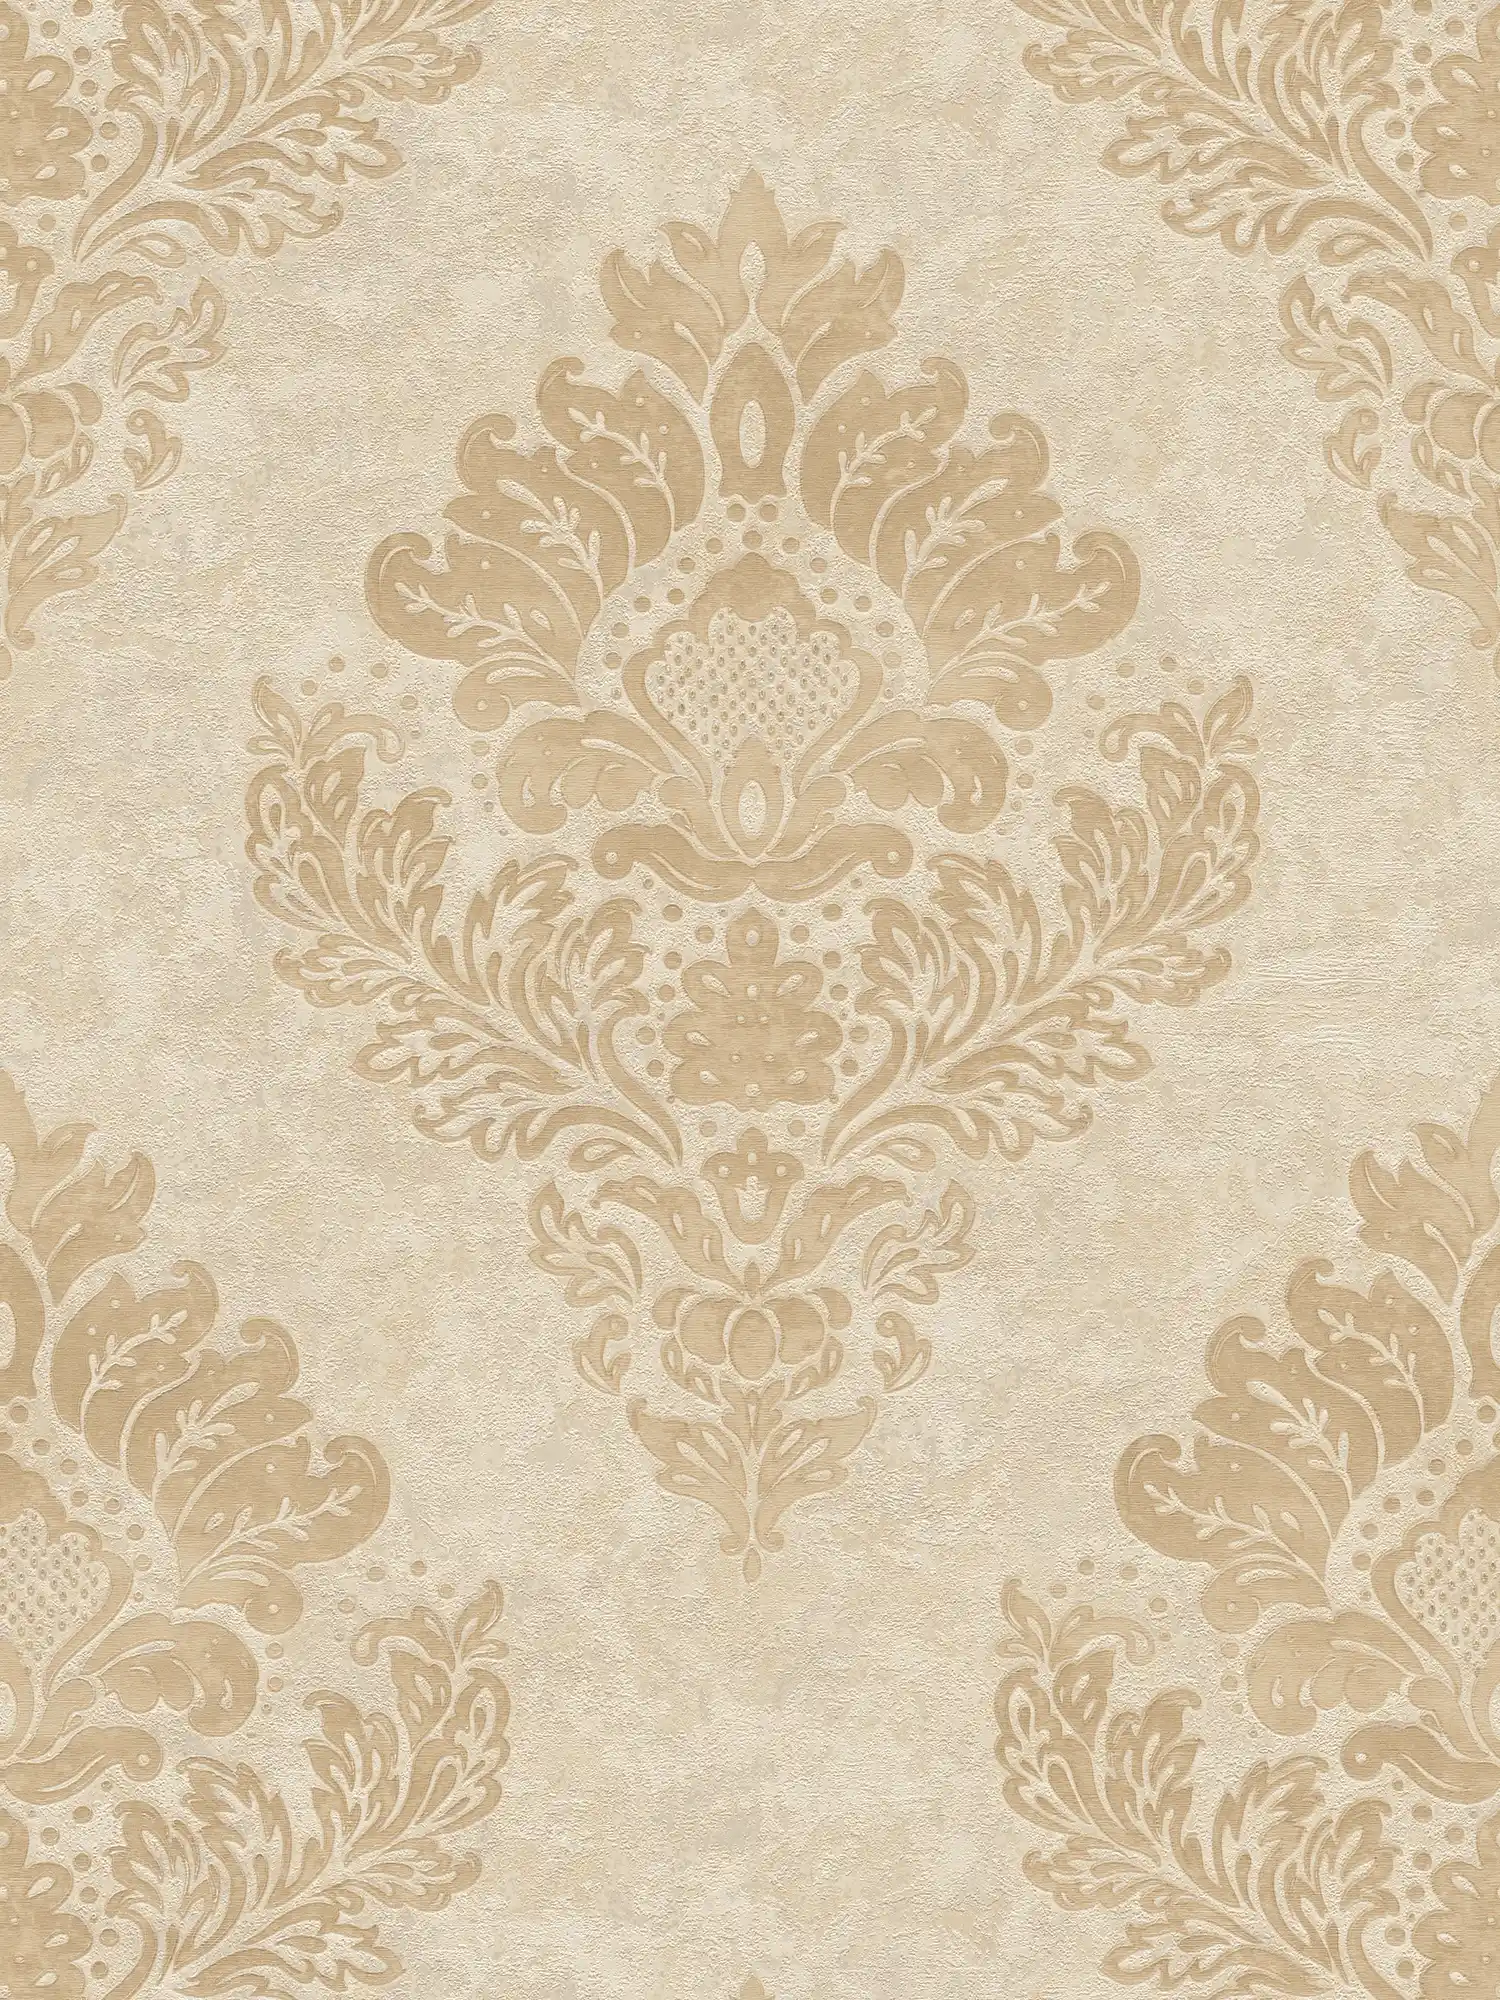         Wallpaper with floral ornaments & metallic effect - beige, brown
    